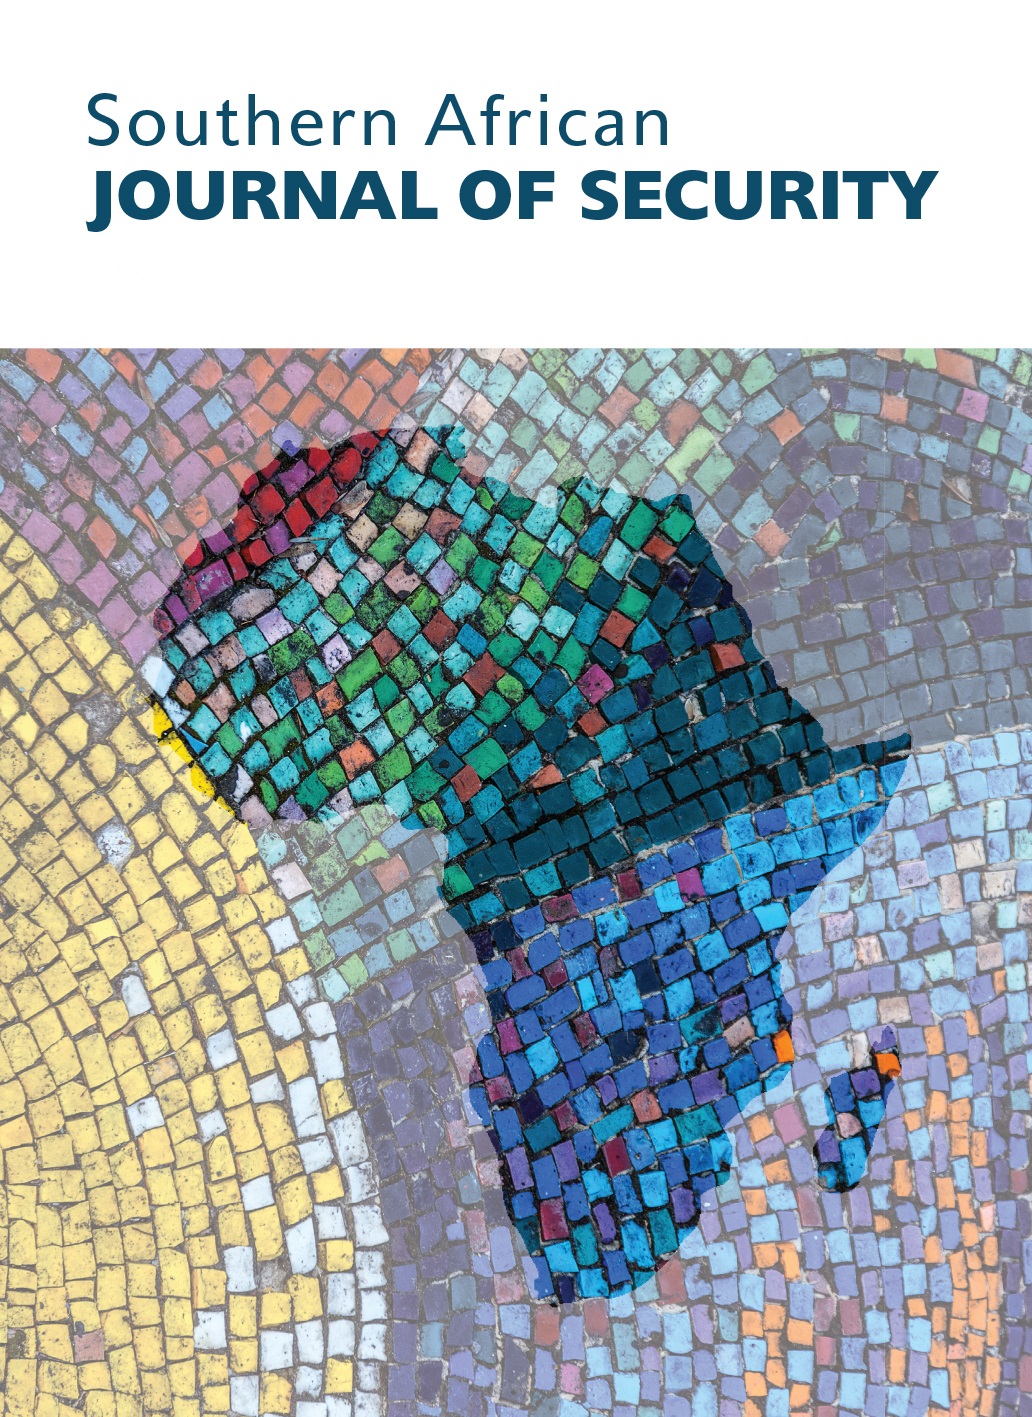 Cover image of the Southern African Journal of Security